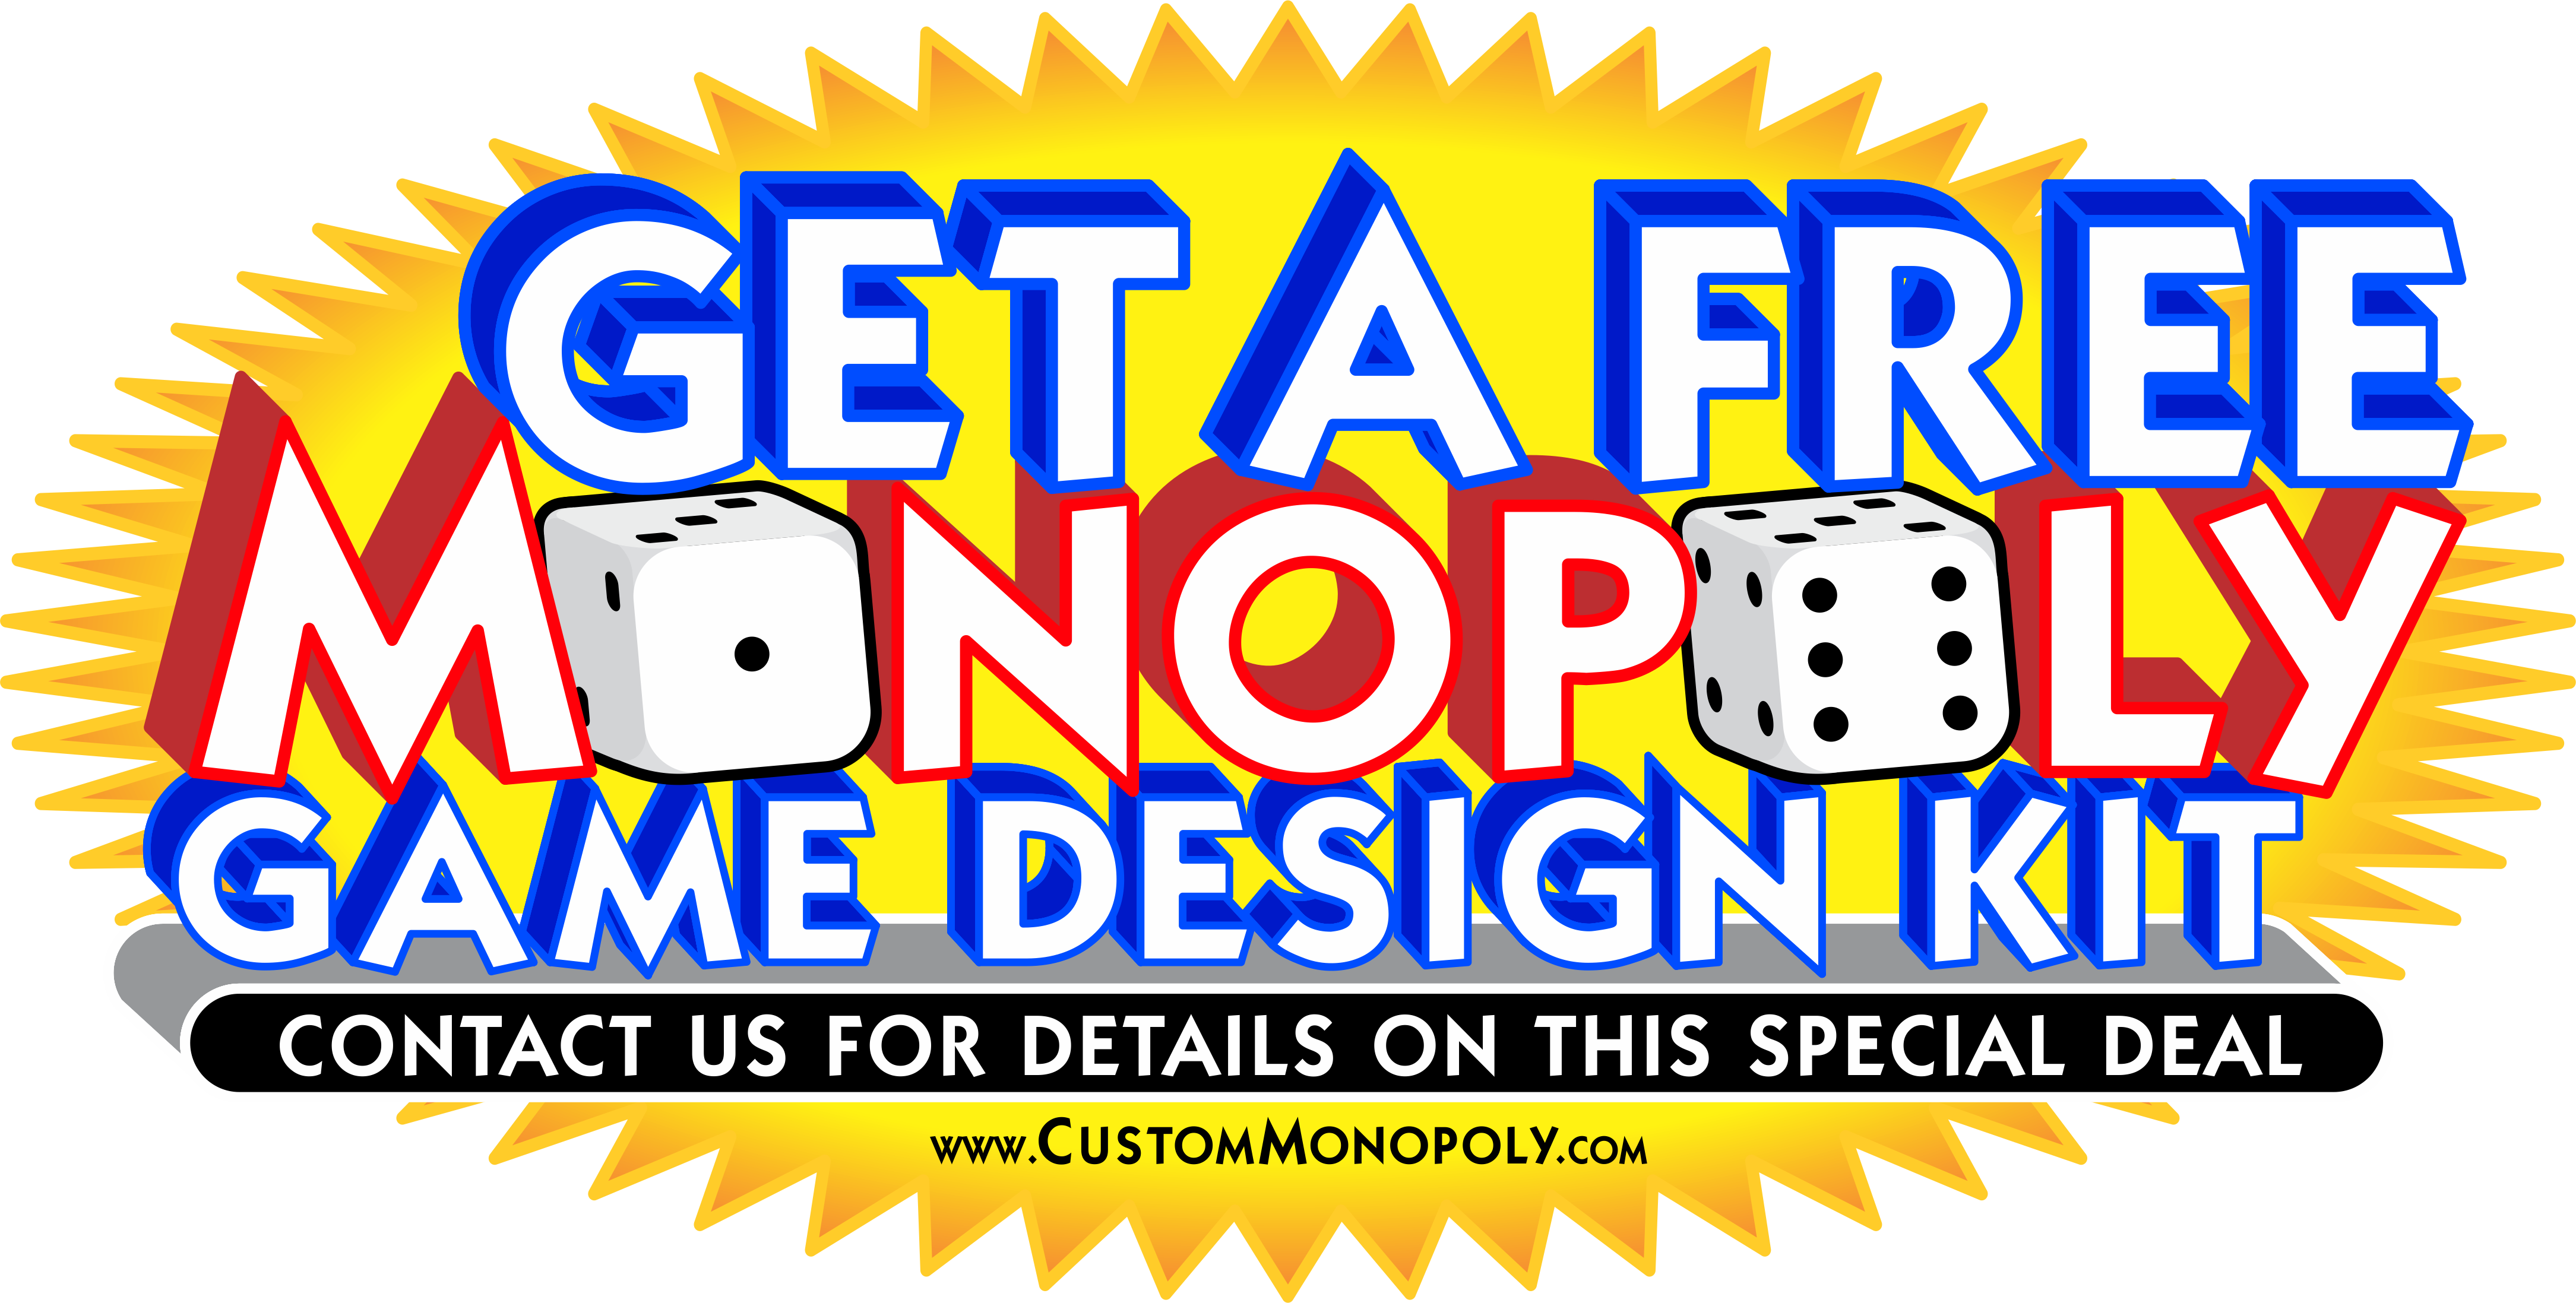 Message Us for a FREE CUSTOMOPOLY Game Design Kit